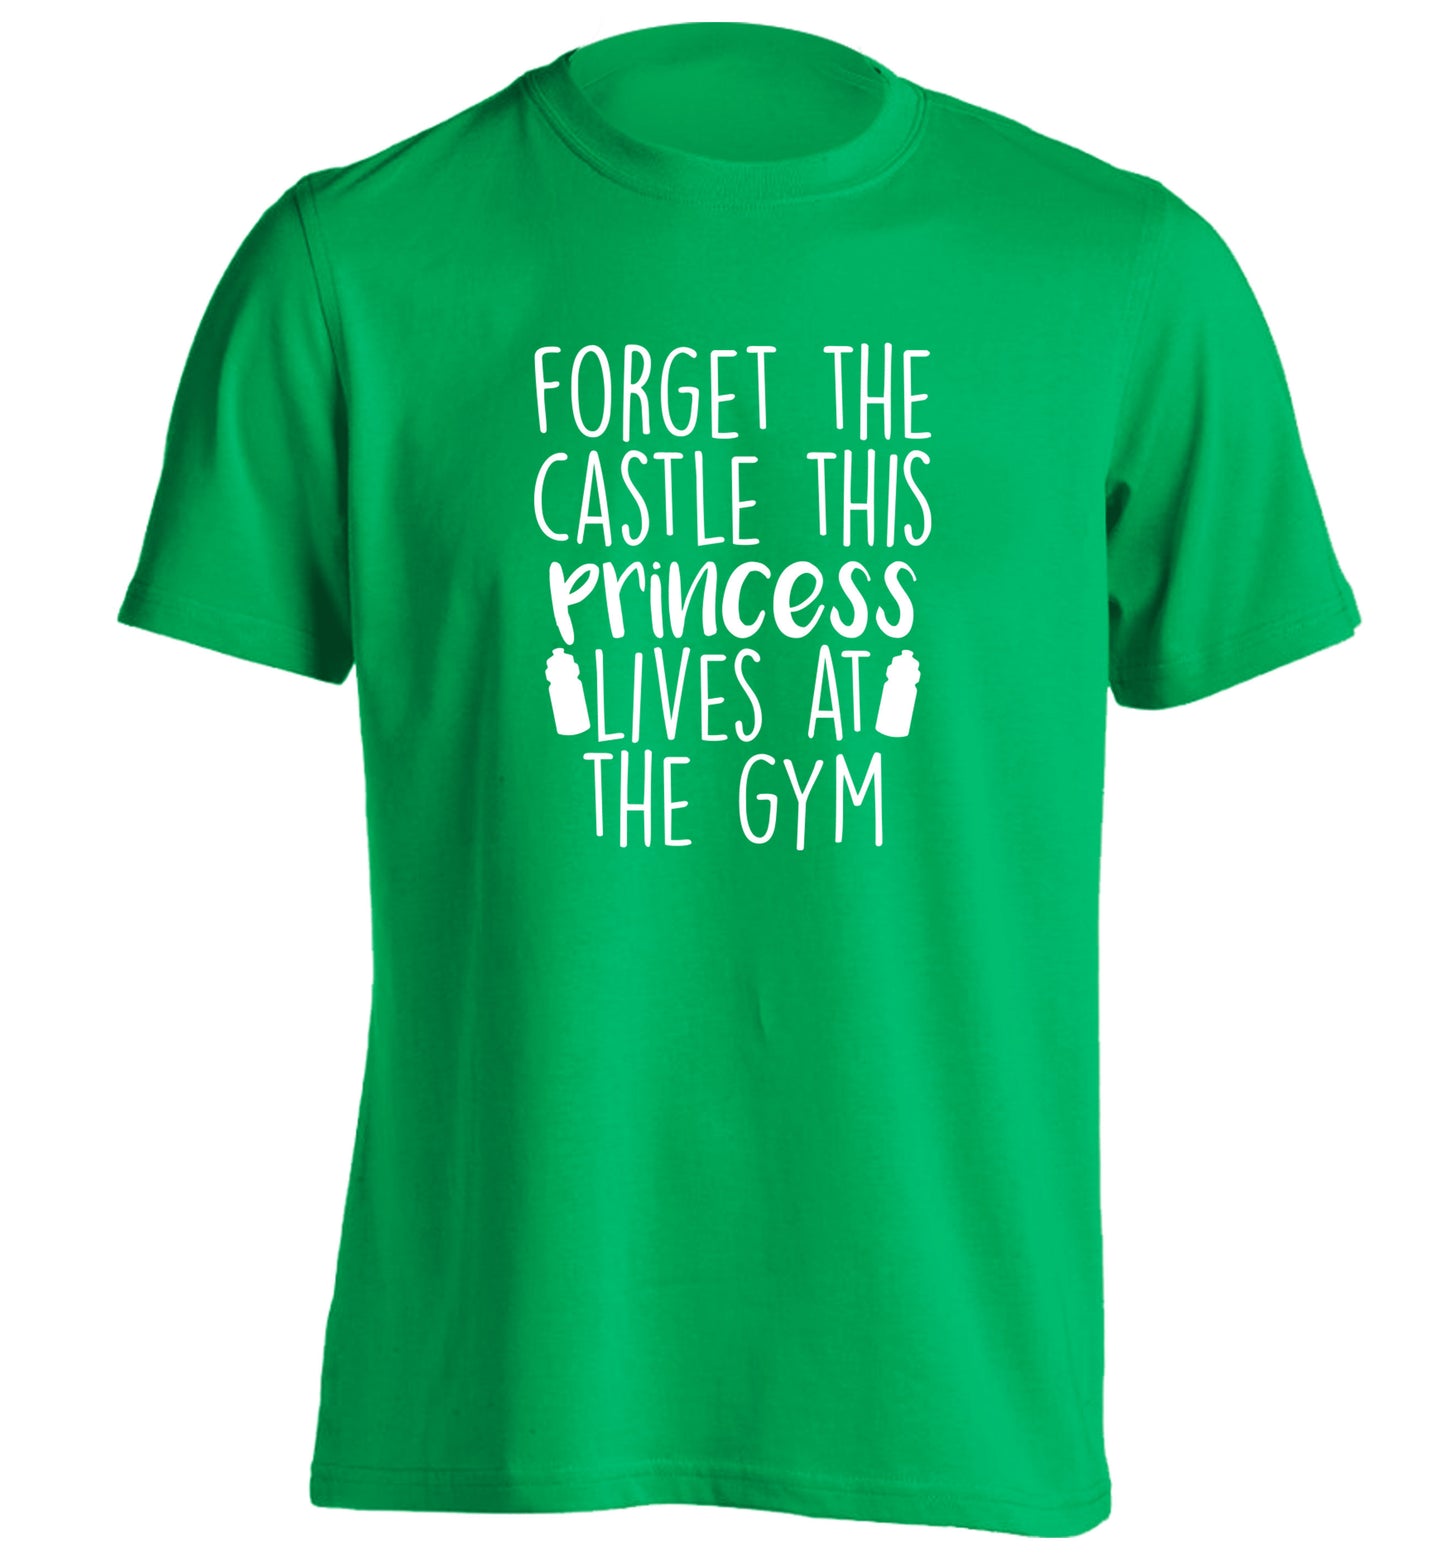 Forget the castle this princess lives at the gym adults unisex green Tshirt 2XL